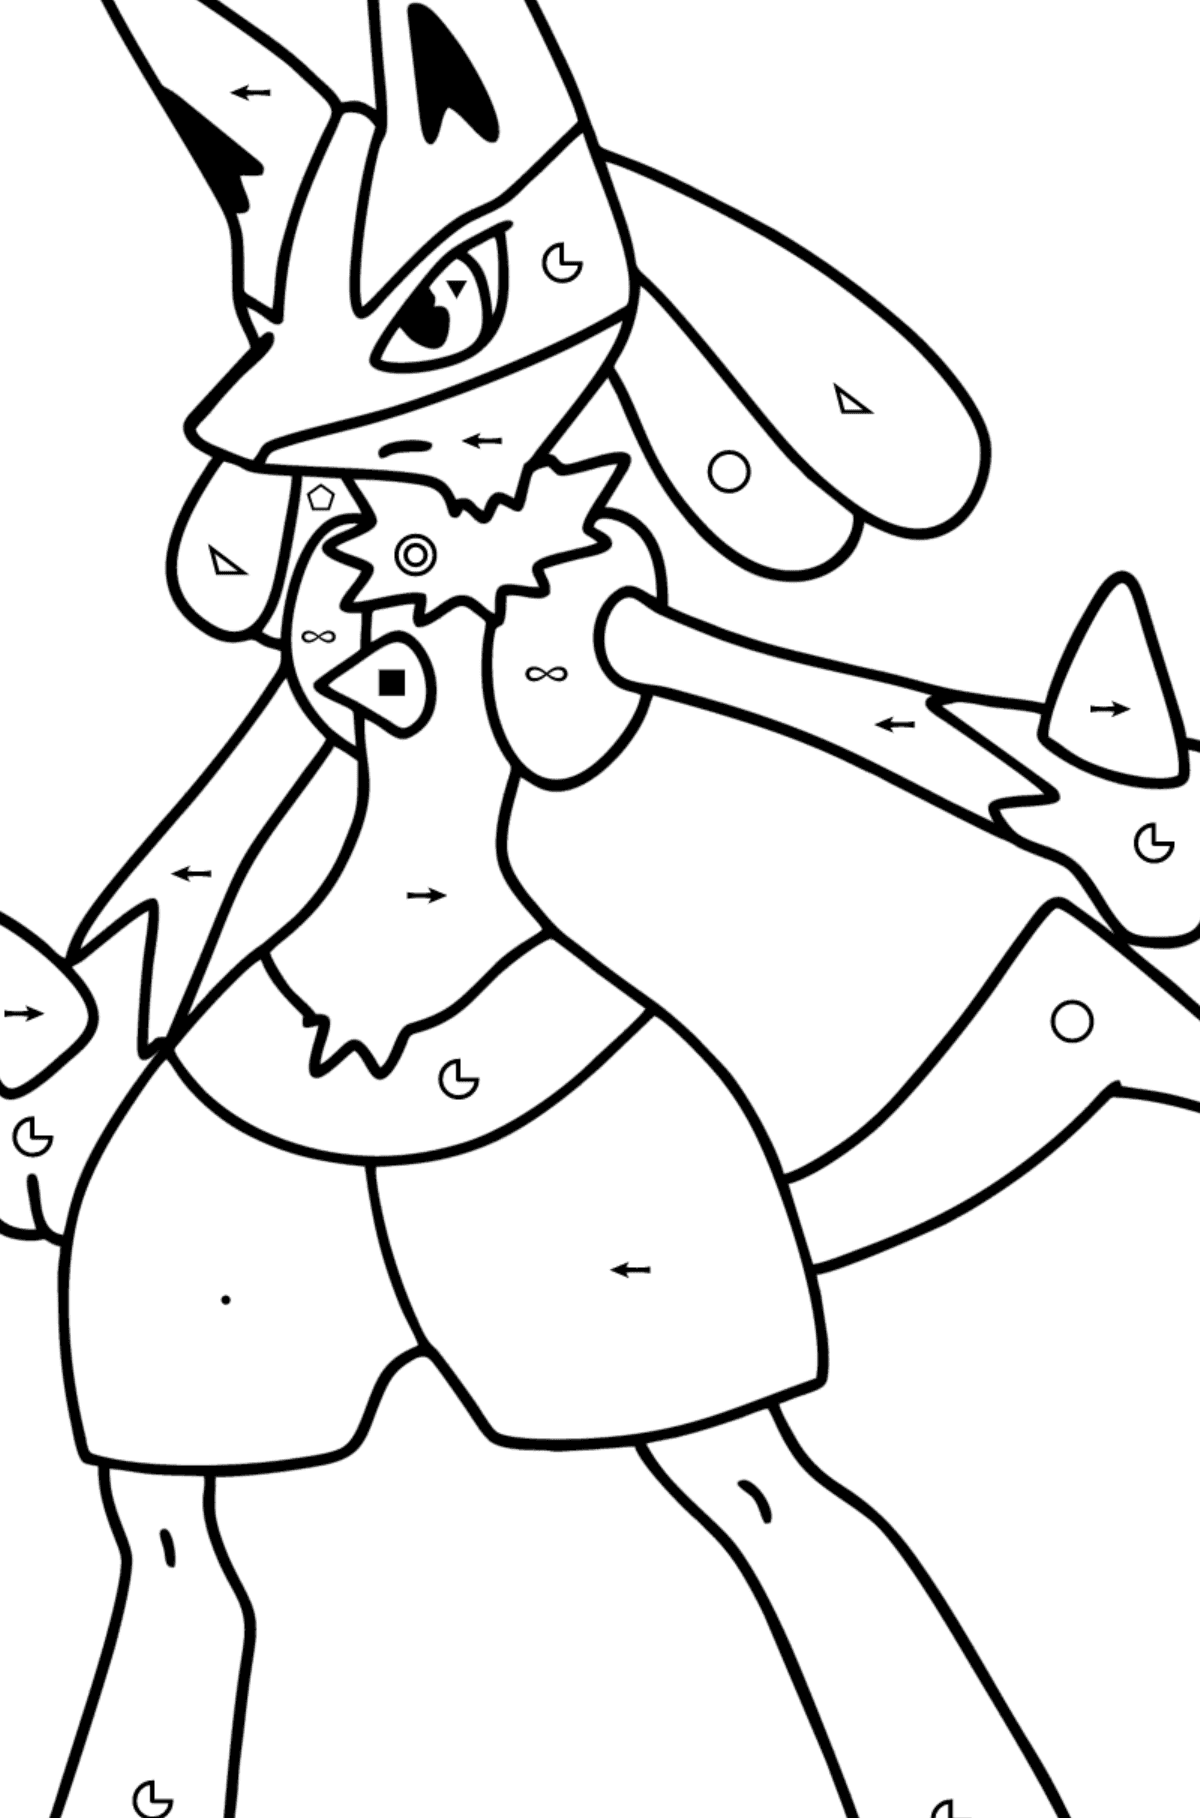 Coloring page Pokemon Go Lucario - Coloring by Symbols and Geometric Shapes for Kids